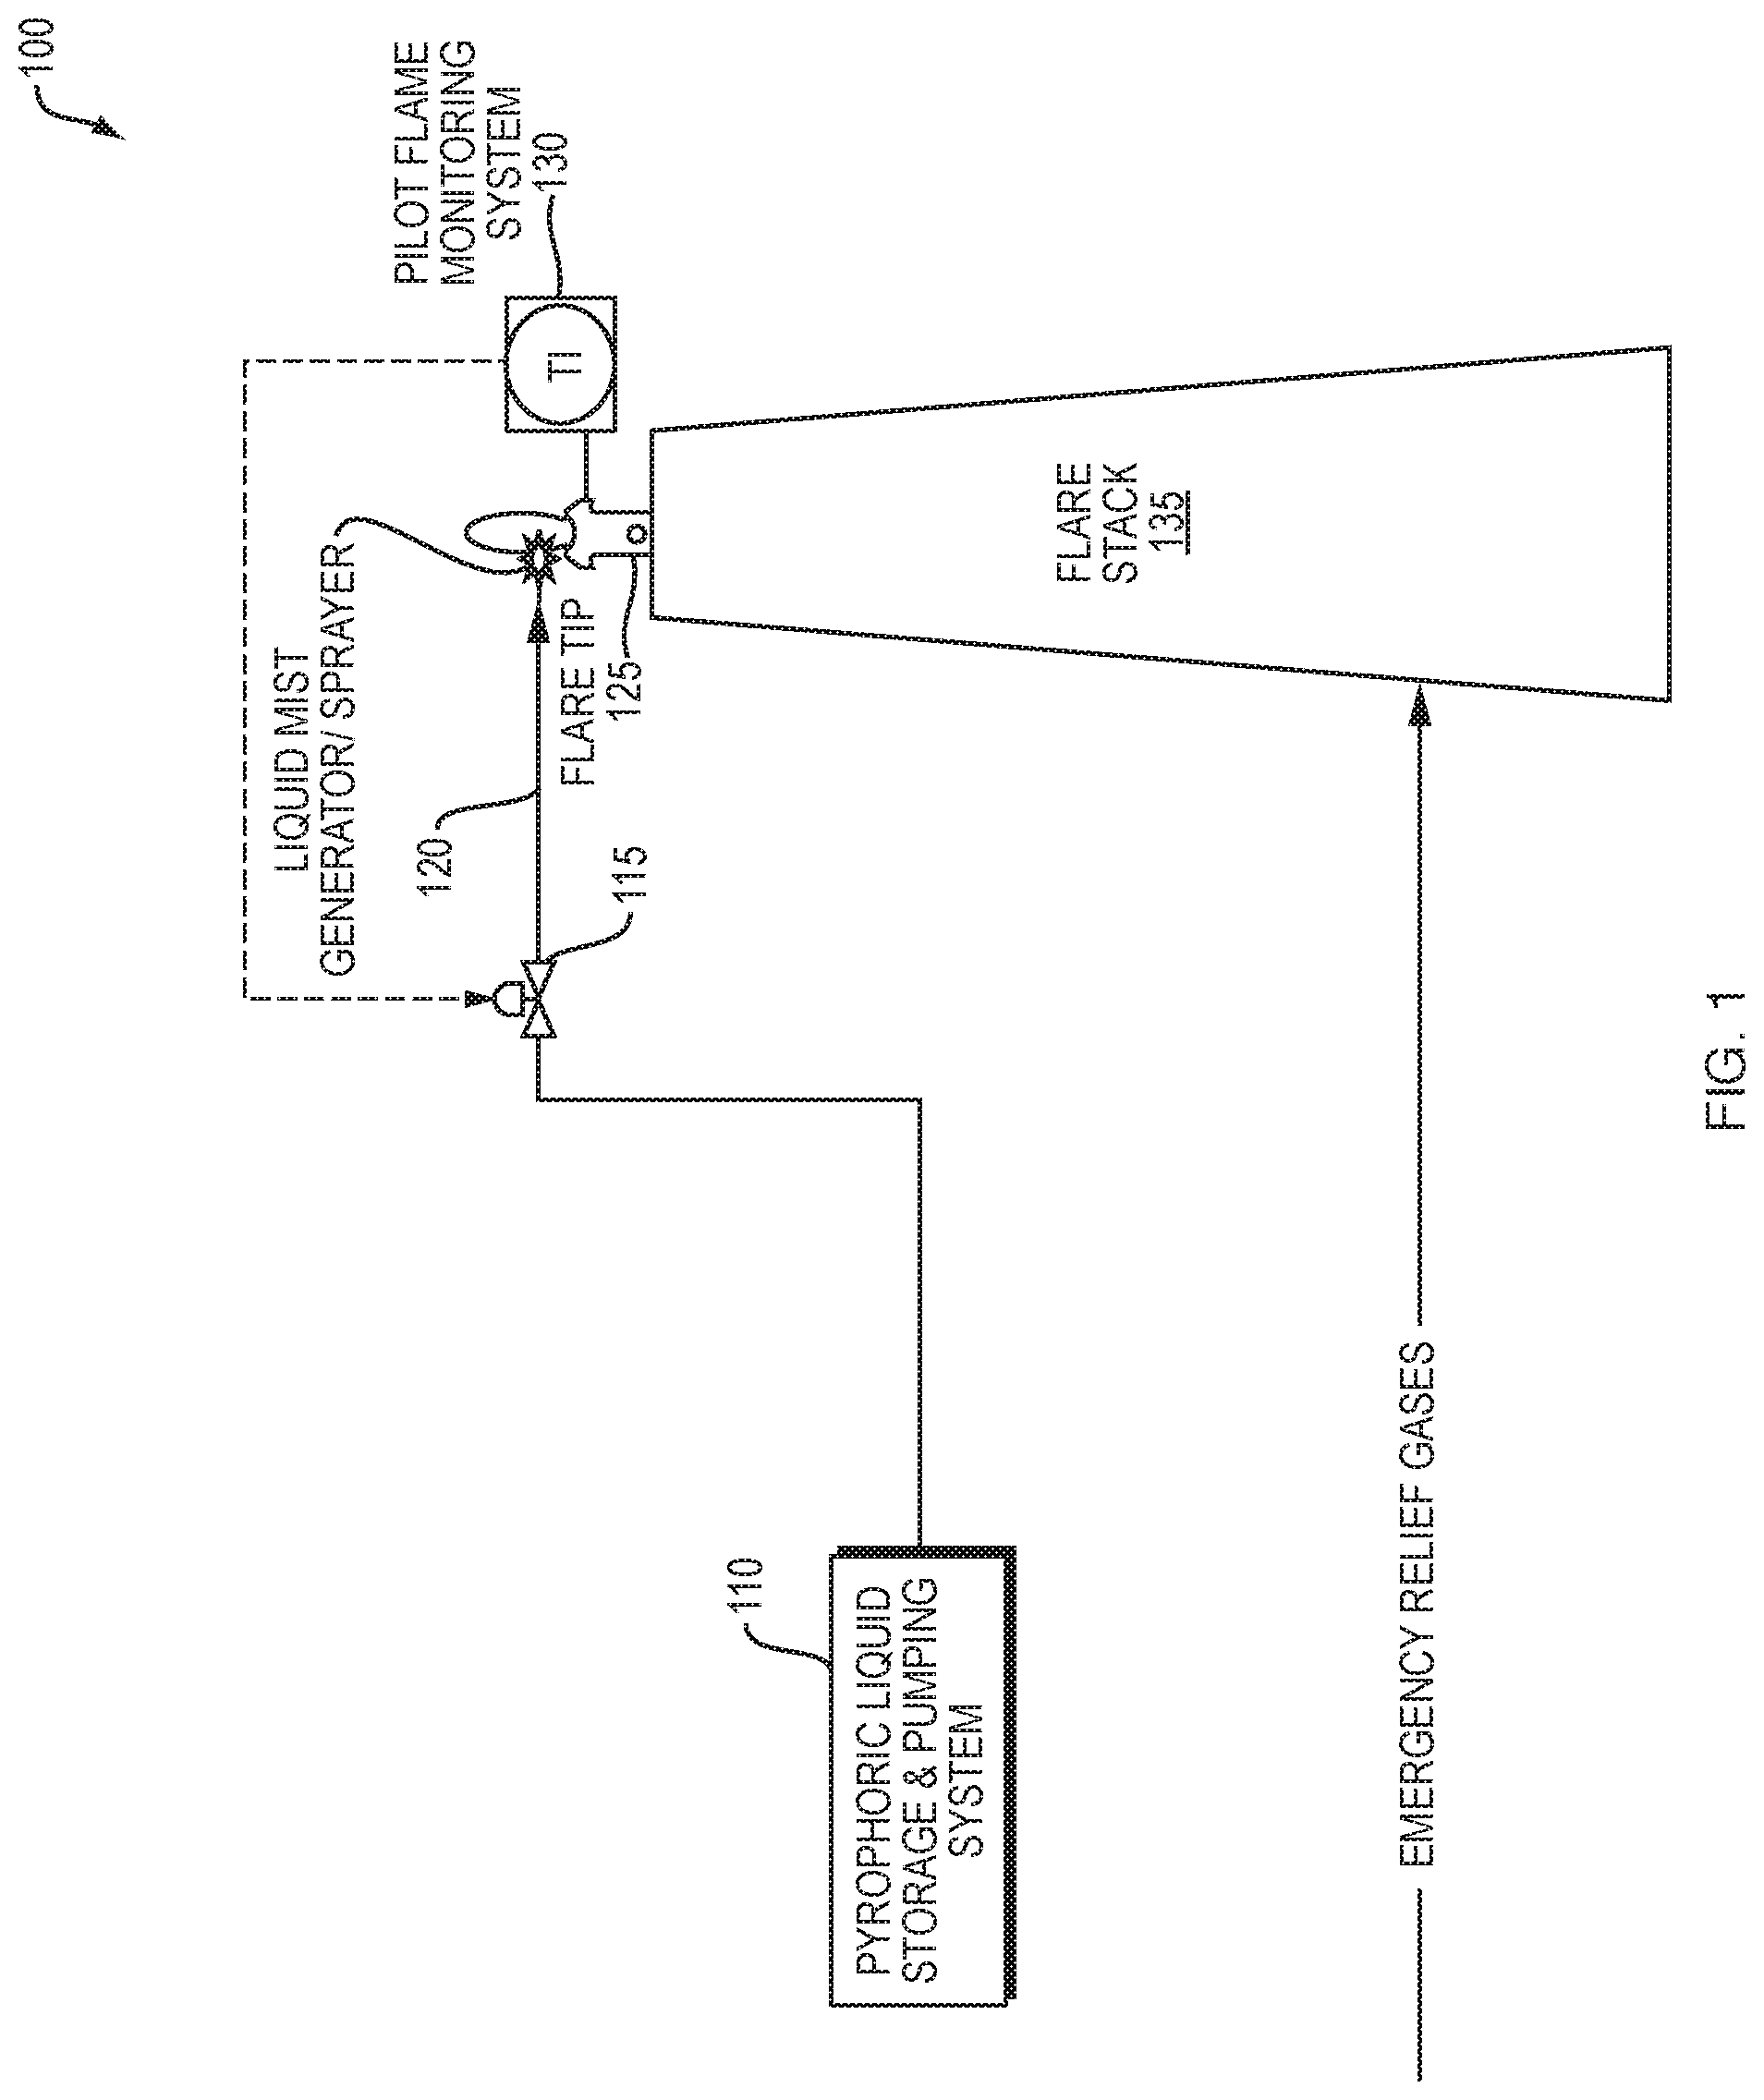 flare stack ignition system